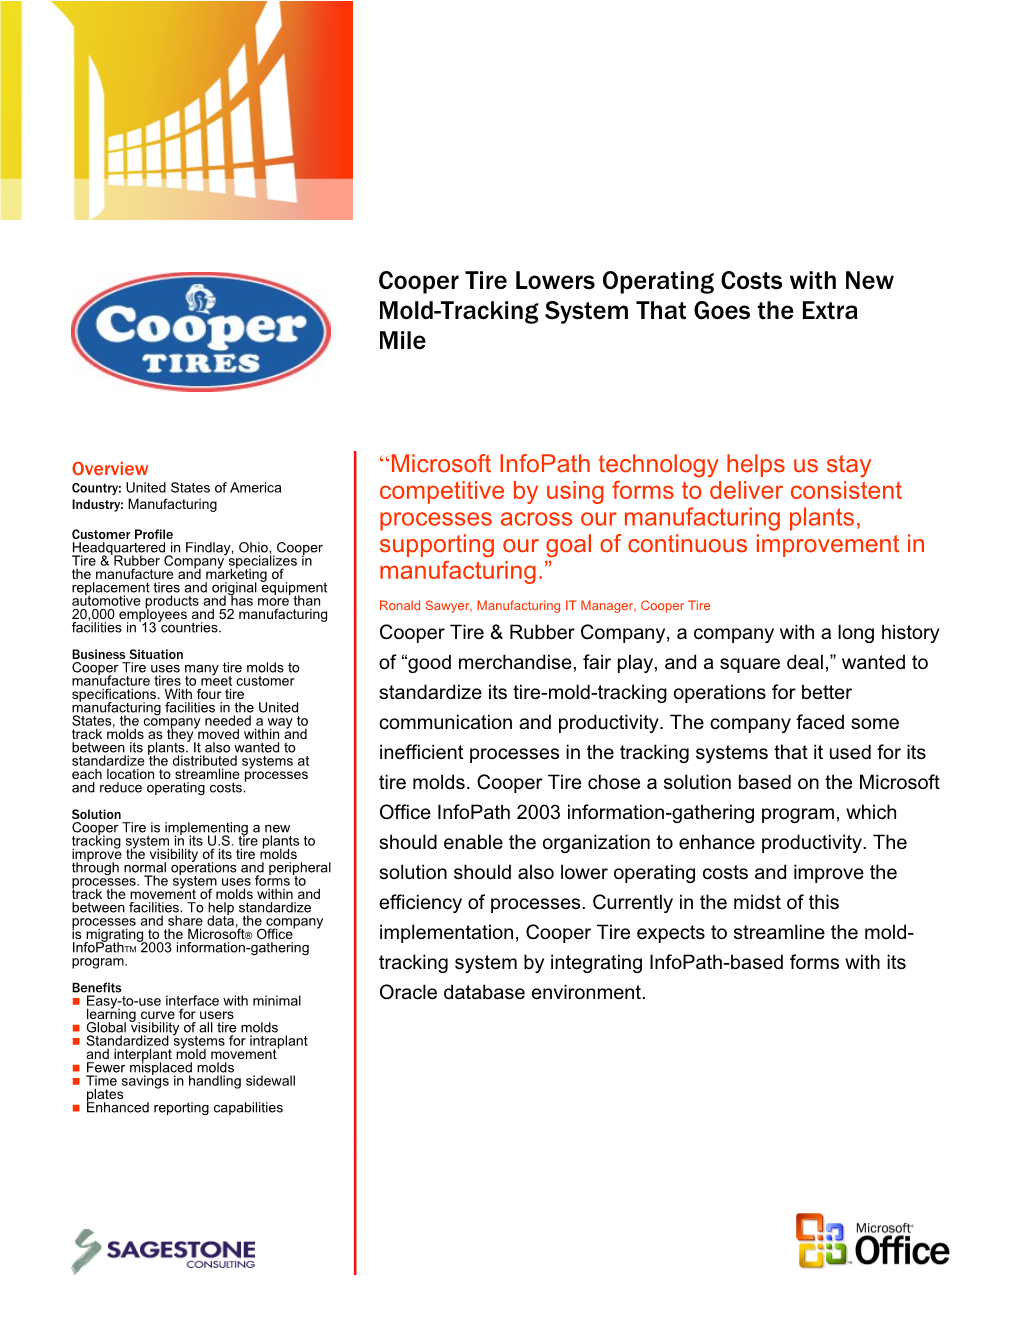 Writeimage CEP Cooper Tire Lowers Operating Costs with New Mold Tracking System That Goes